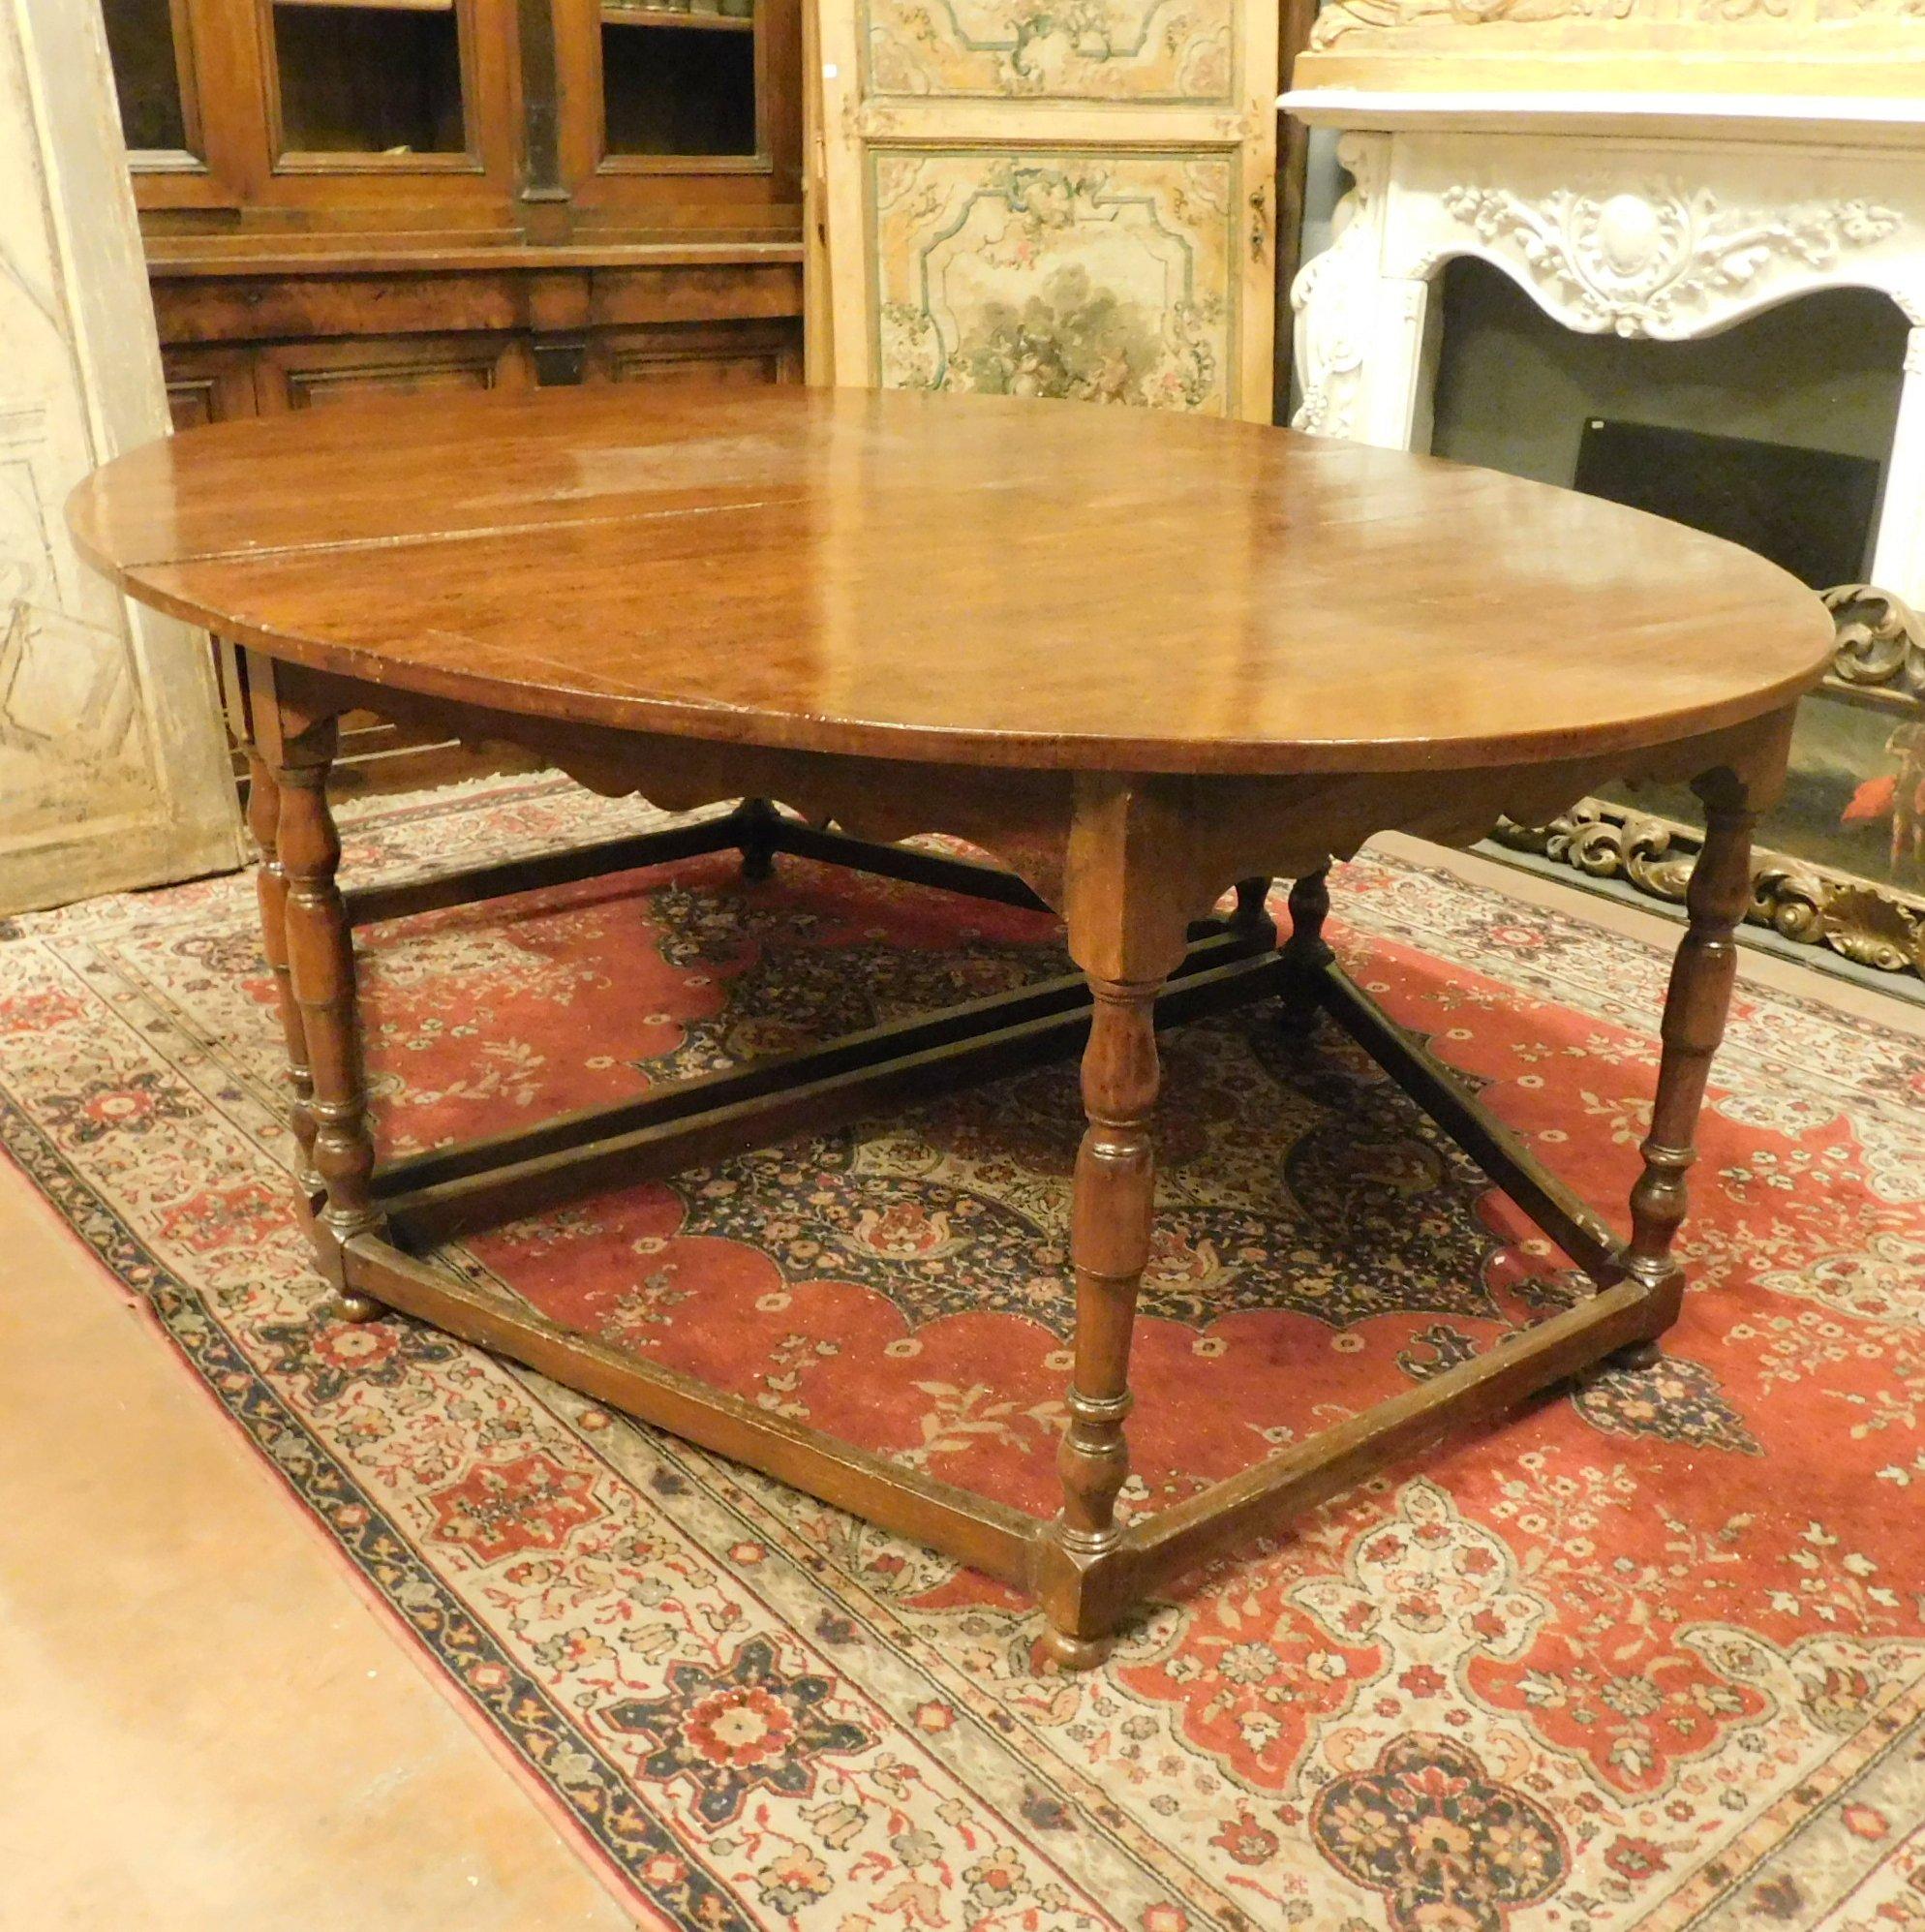 Italian Antique Oval Table in Beechwood, Divisible 2 Half-Moons with 8 Legs, 1600, Italy For Sale